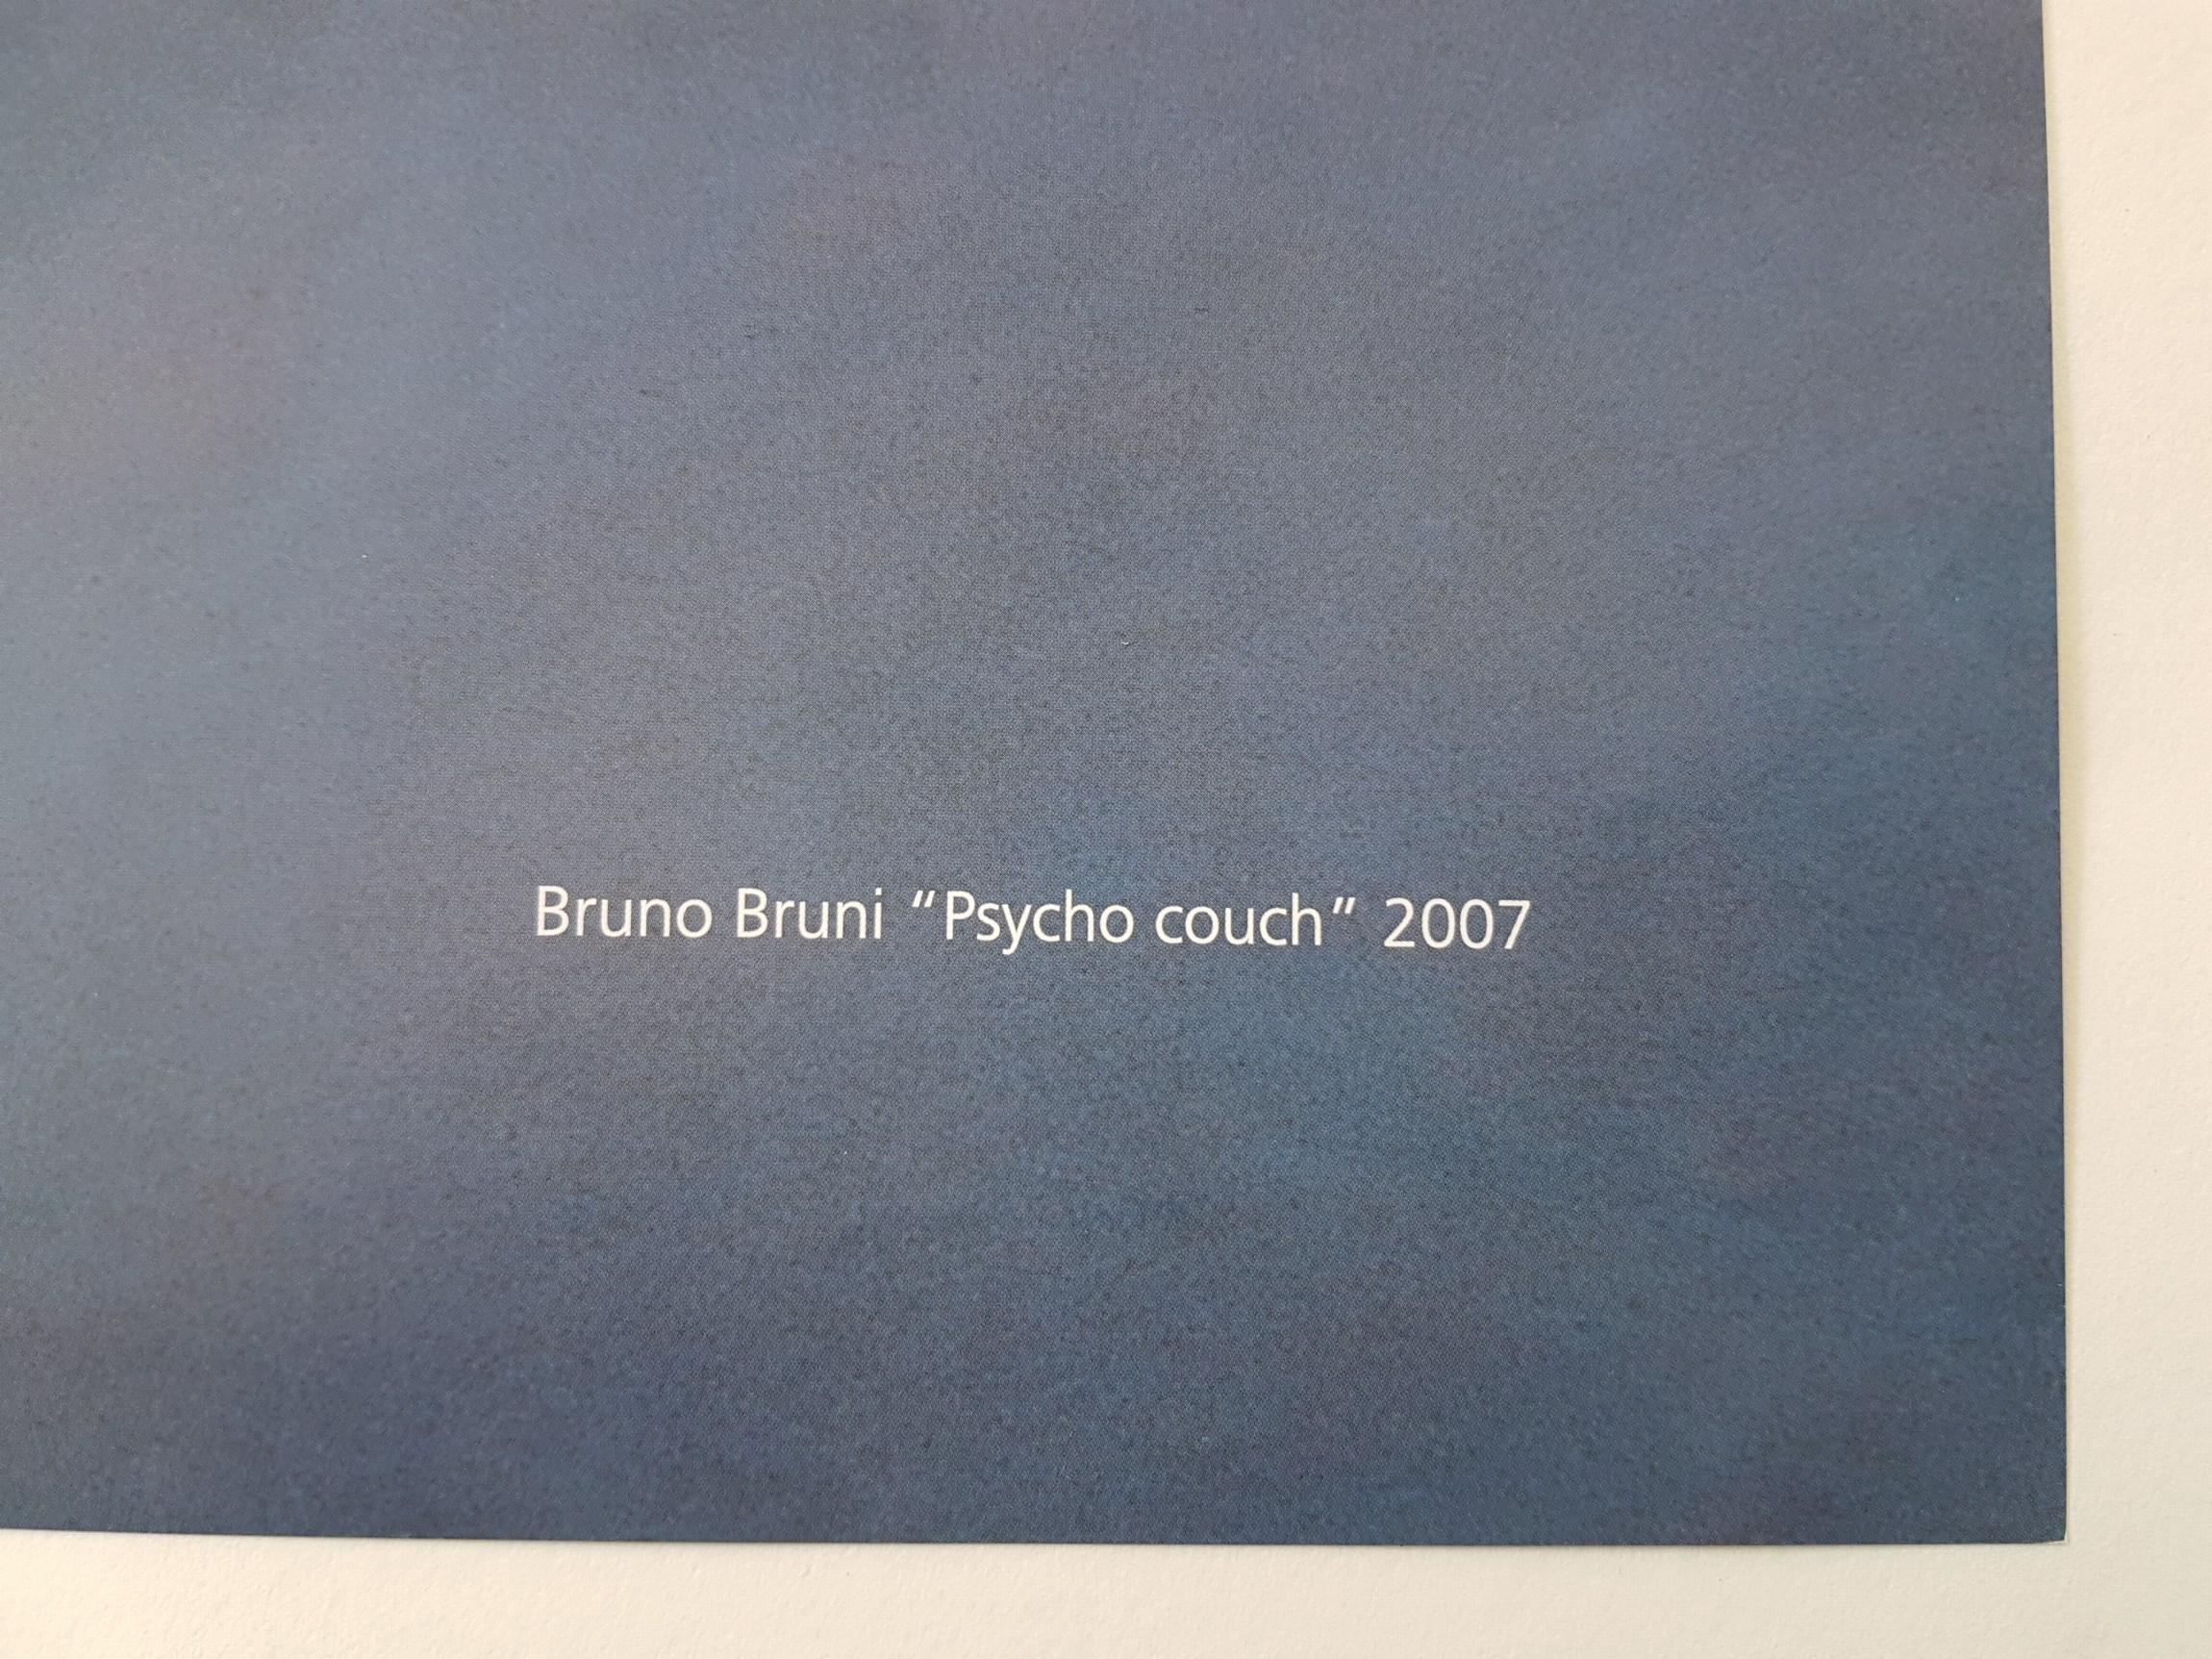 Bruno Bruni (Italian)
Title: Psycho Couch
Year: 2007
Medium: Color offset lithograph
Signed by hand
Edition: Limited
Size: 38.2 × 26.5 inches

Bruno Bruni senior (born 22 November 1935, in Gradara) is an Italian lithographer, graphic artist, painter